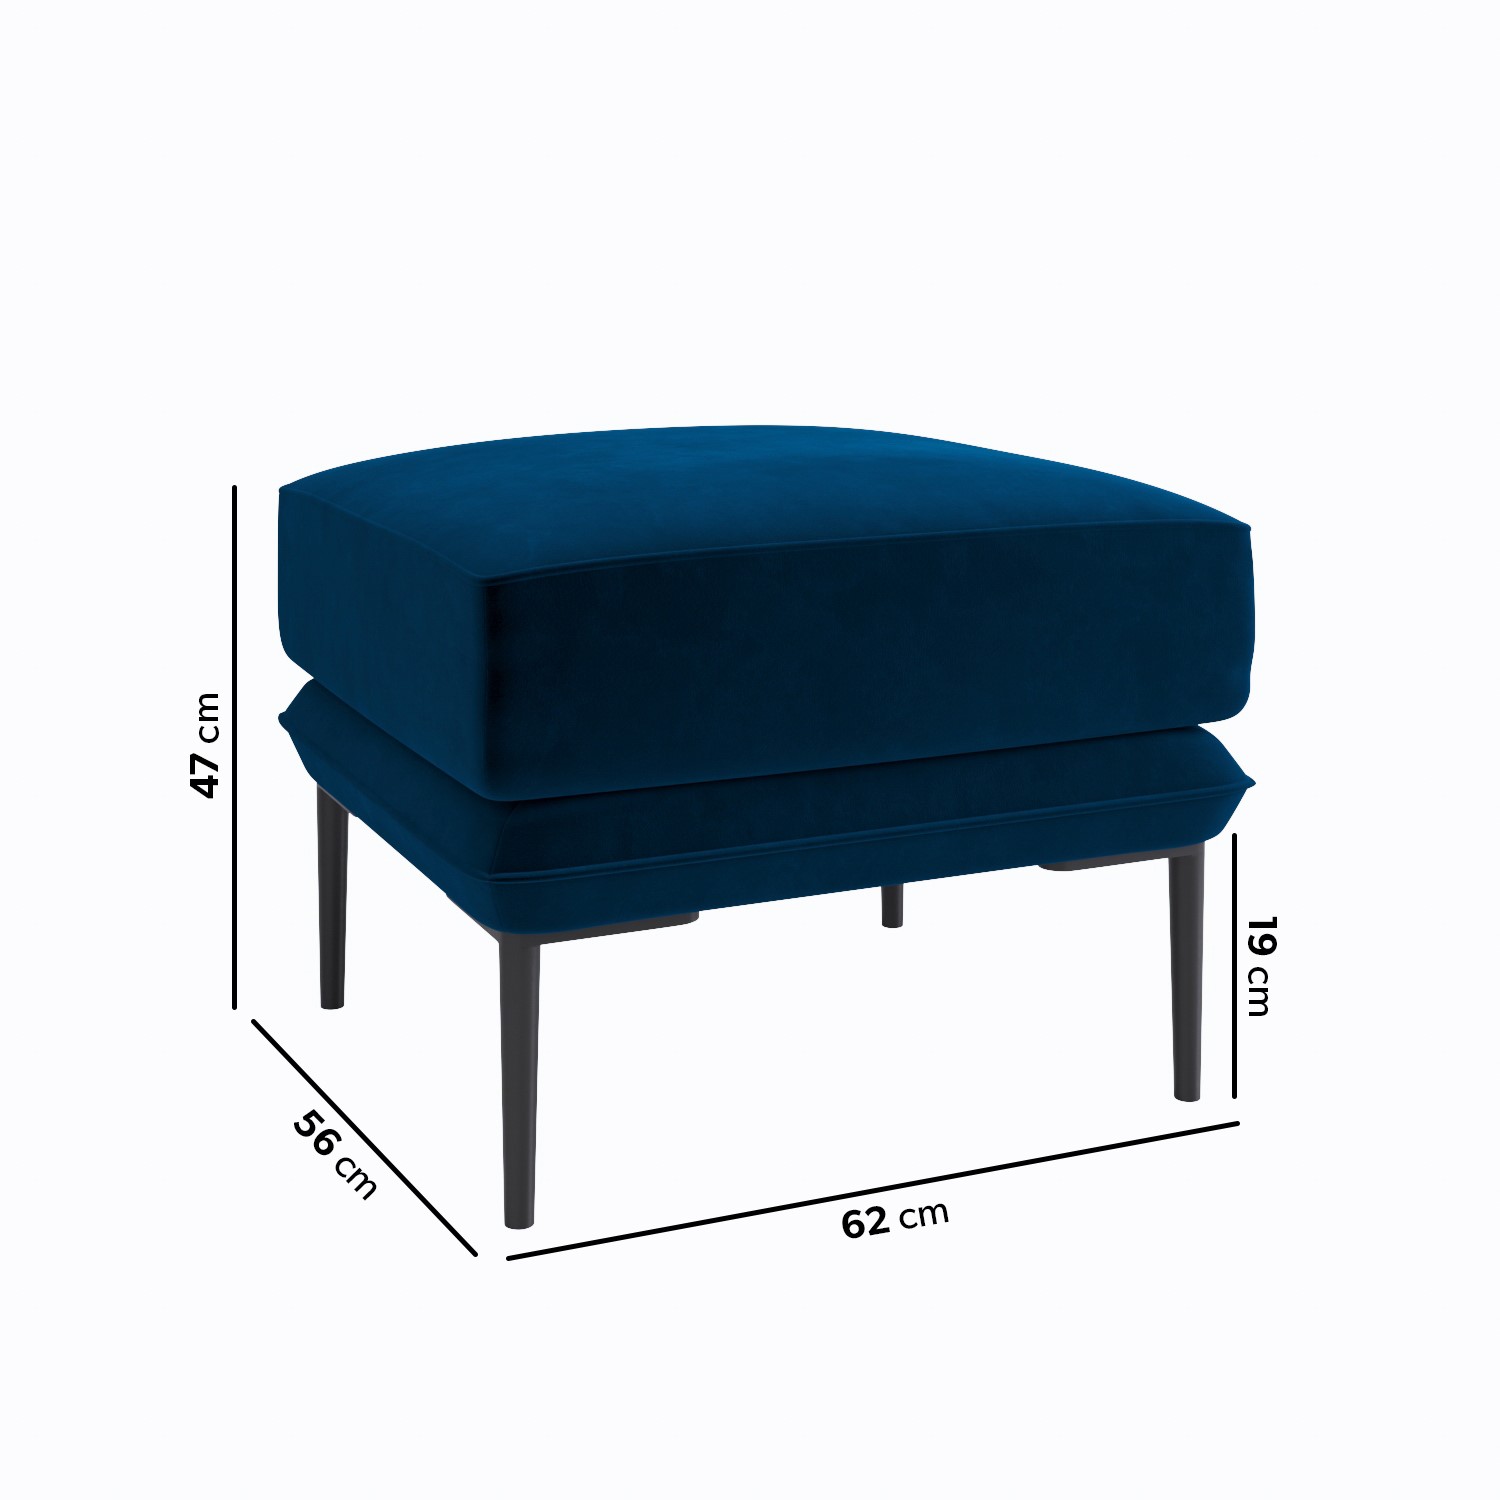 Read more about Small navy velvet footstool lenny